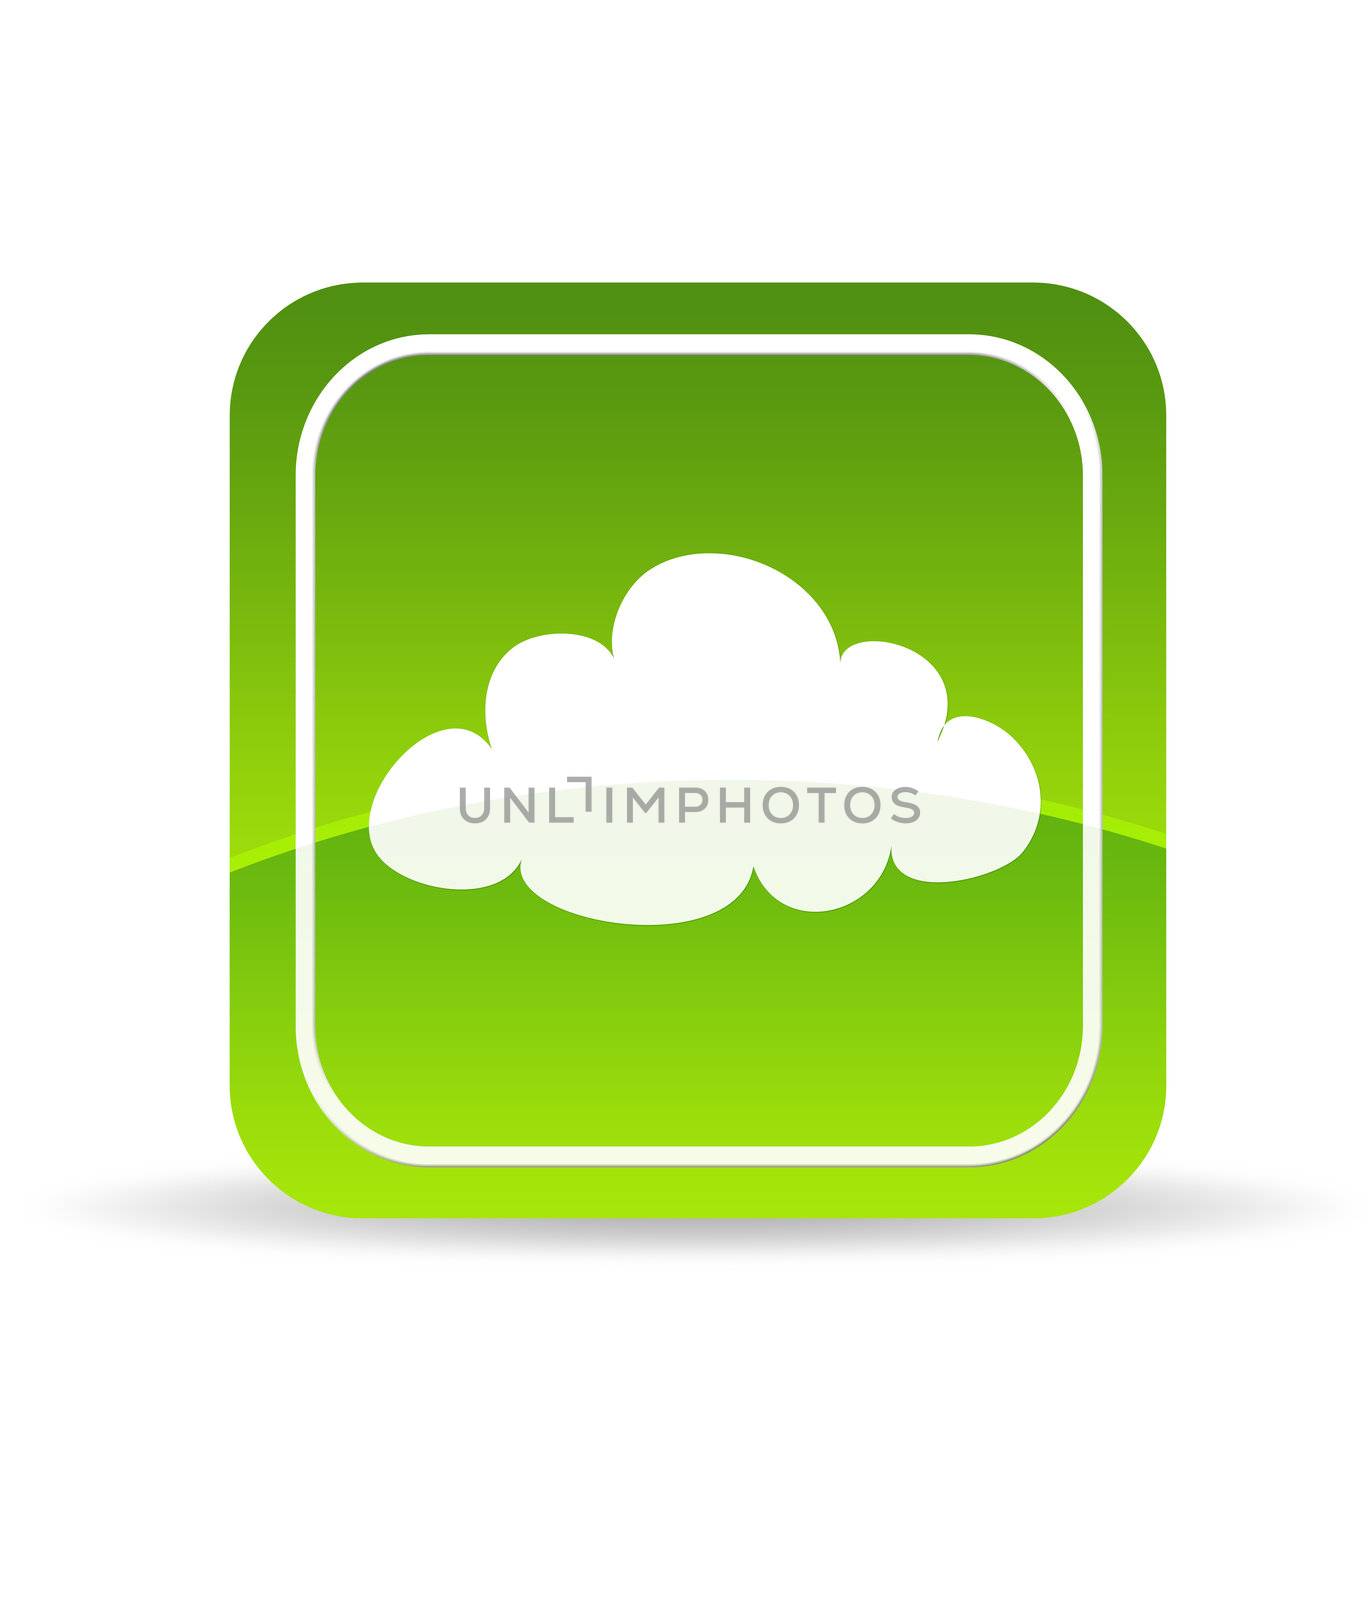 High resolution green cloud computing icon on white background.